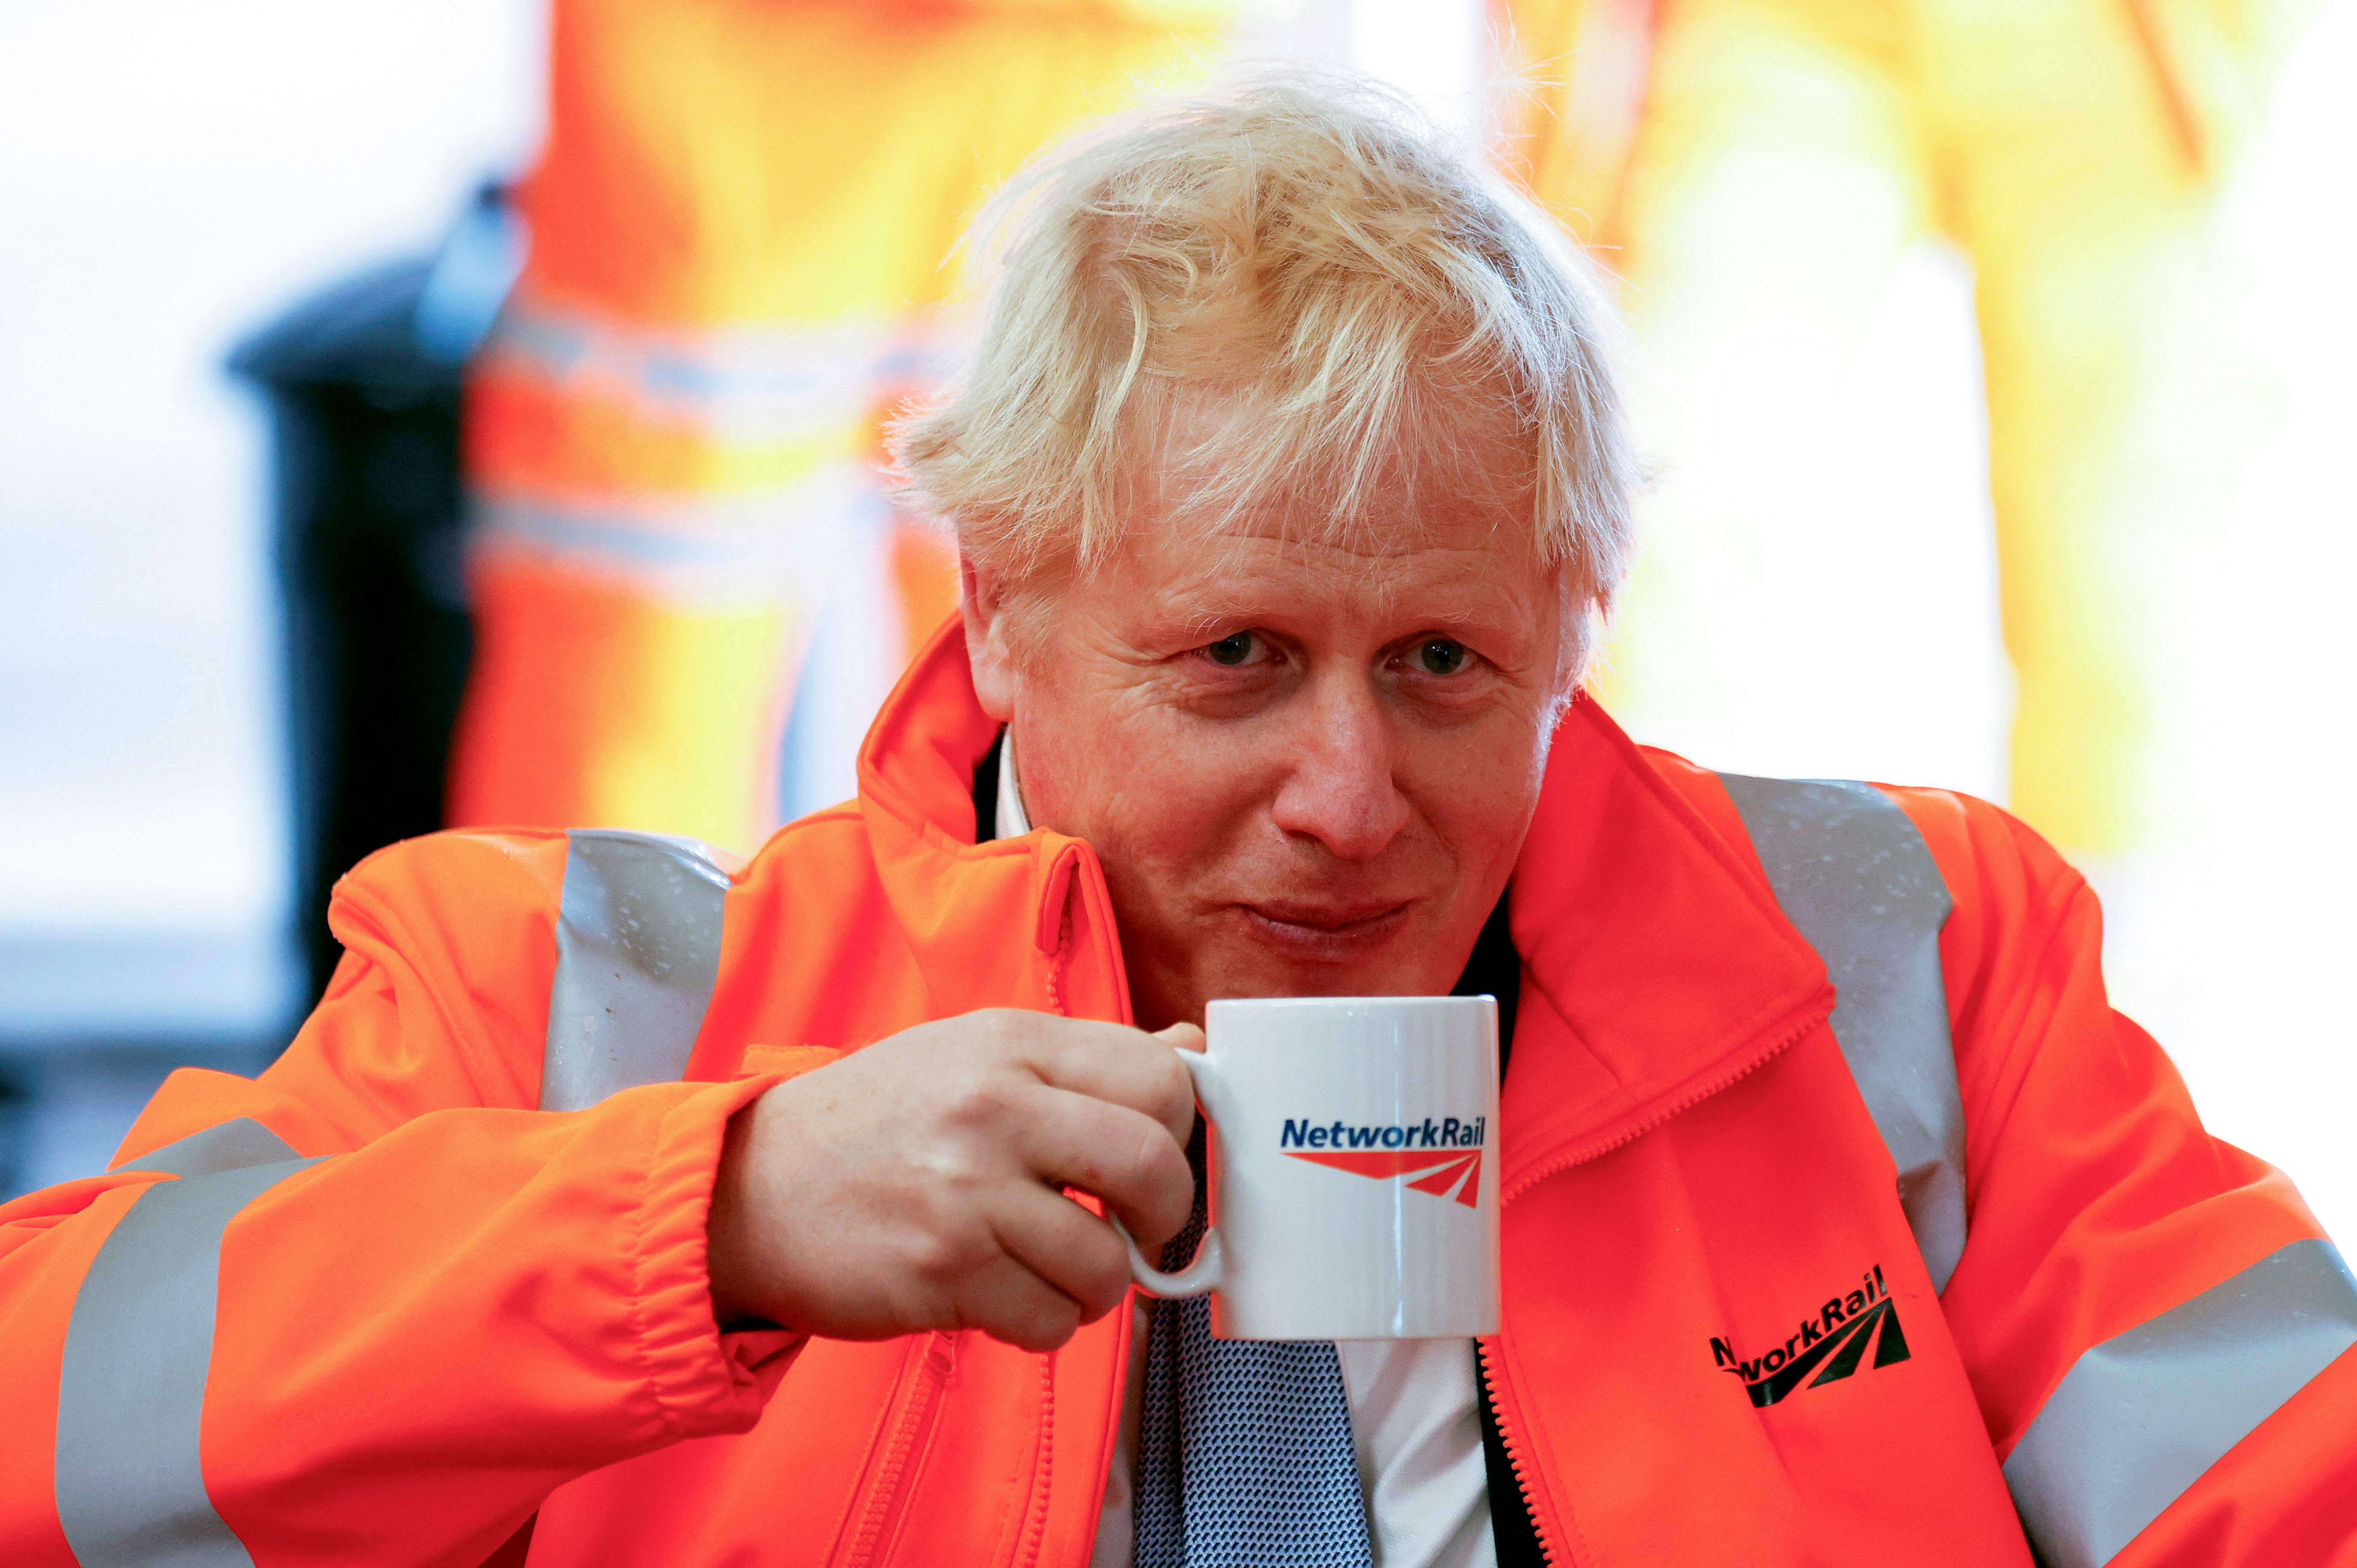 Boris Johnson is not as popular as he once was, but he is currently unassailable